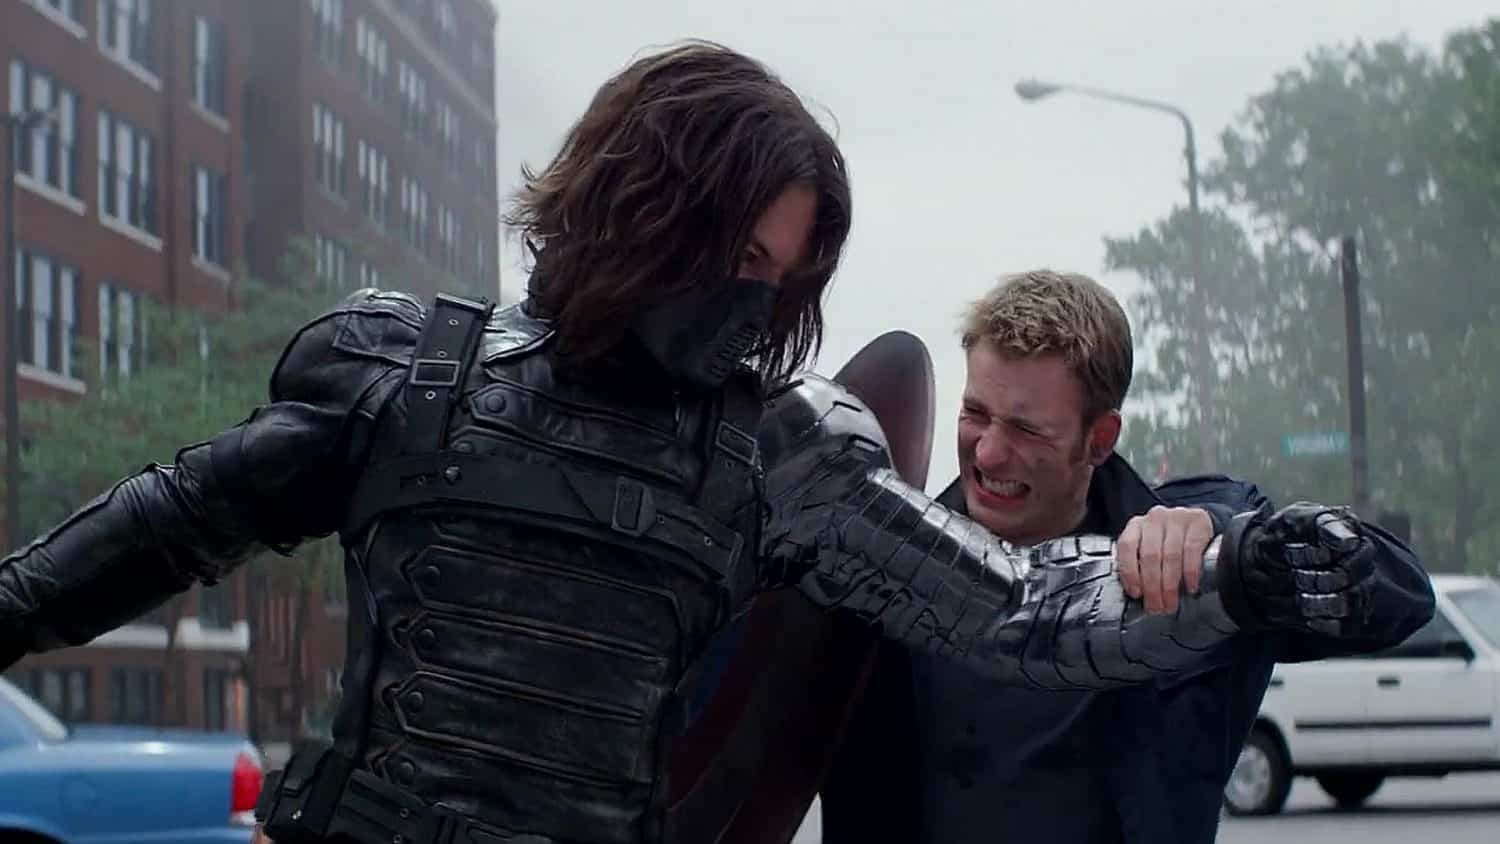 https://www.fortressofsolitude.co.za/wp-content/uploads/2019/05/Why-Bucky-Barnes-Deserves-To-Be-Captain-America-Instead-3.jpg